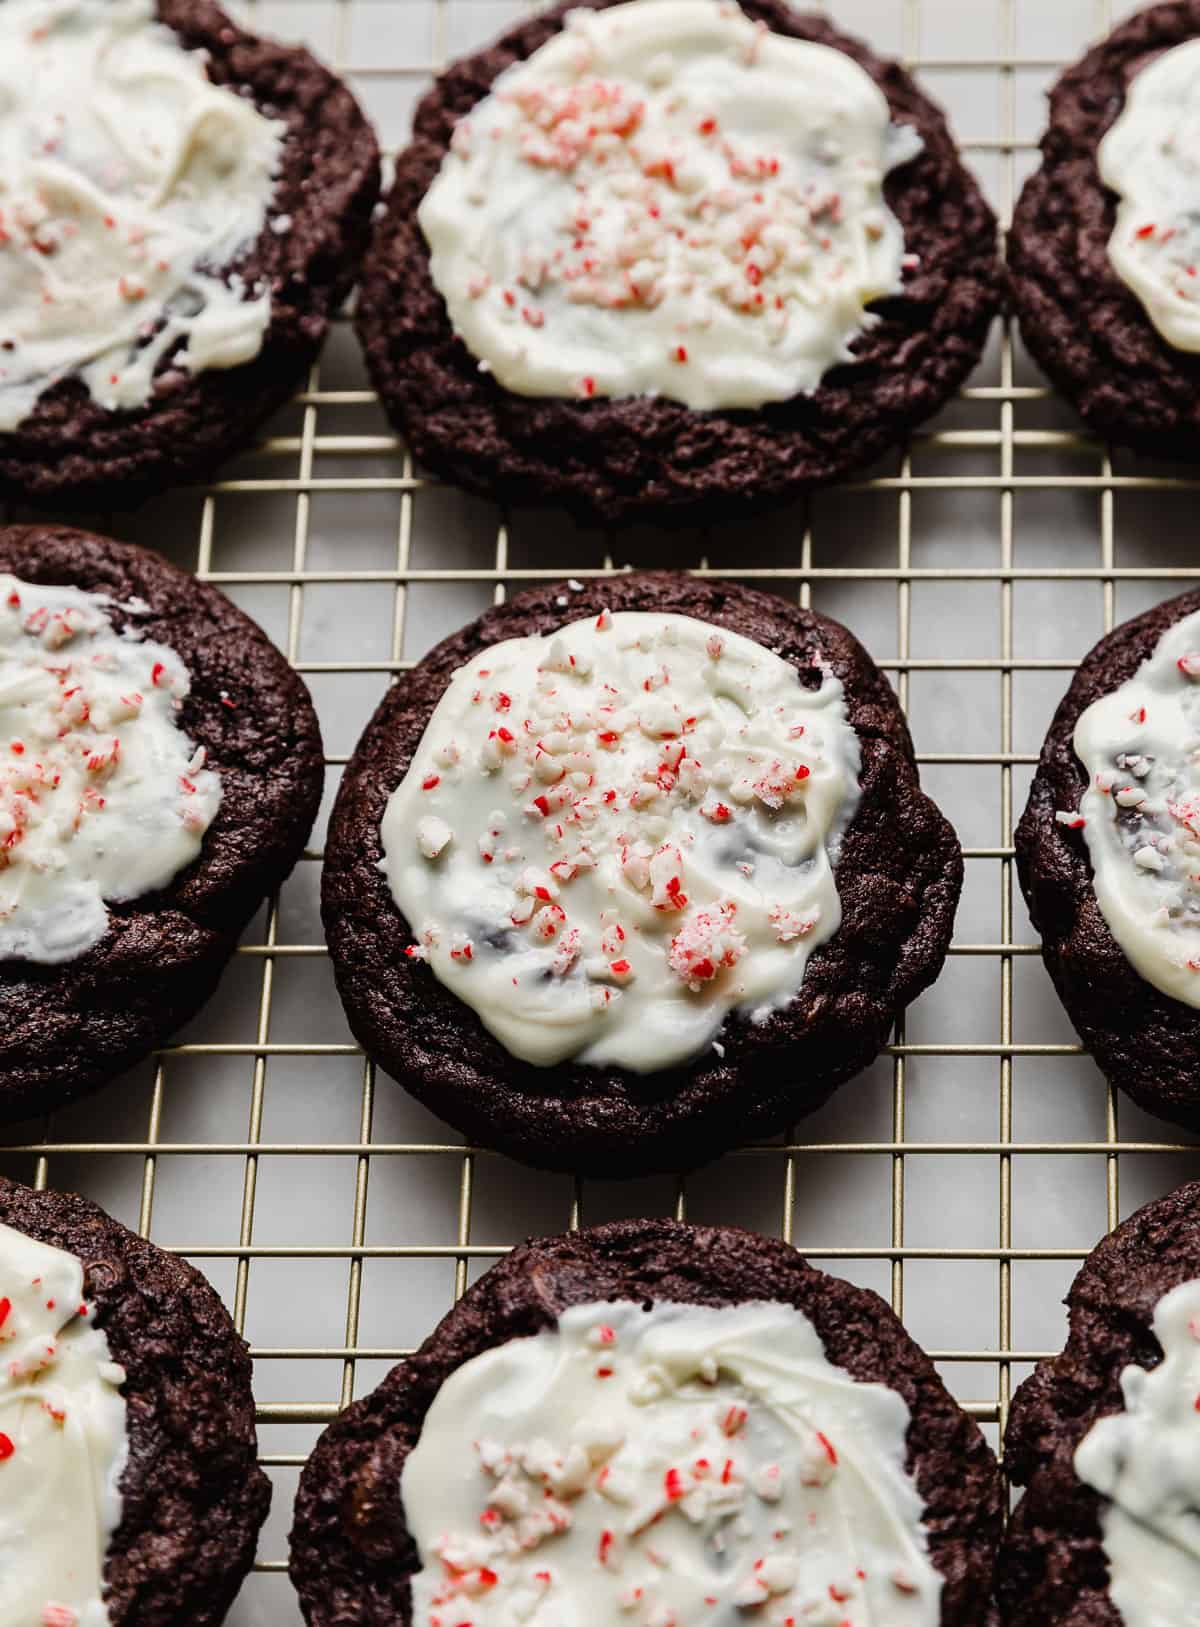 Crumbl Peppermint Bark Cookies topped with white melted chocolate and crushed candy canes.